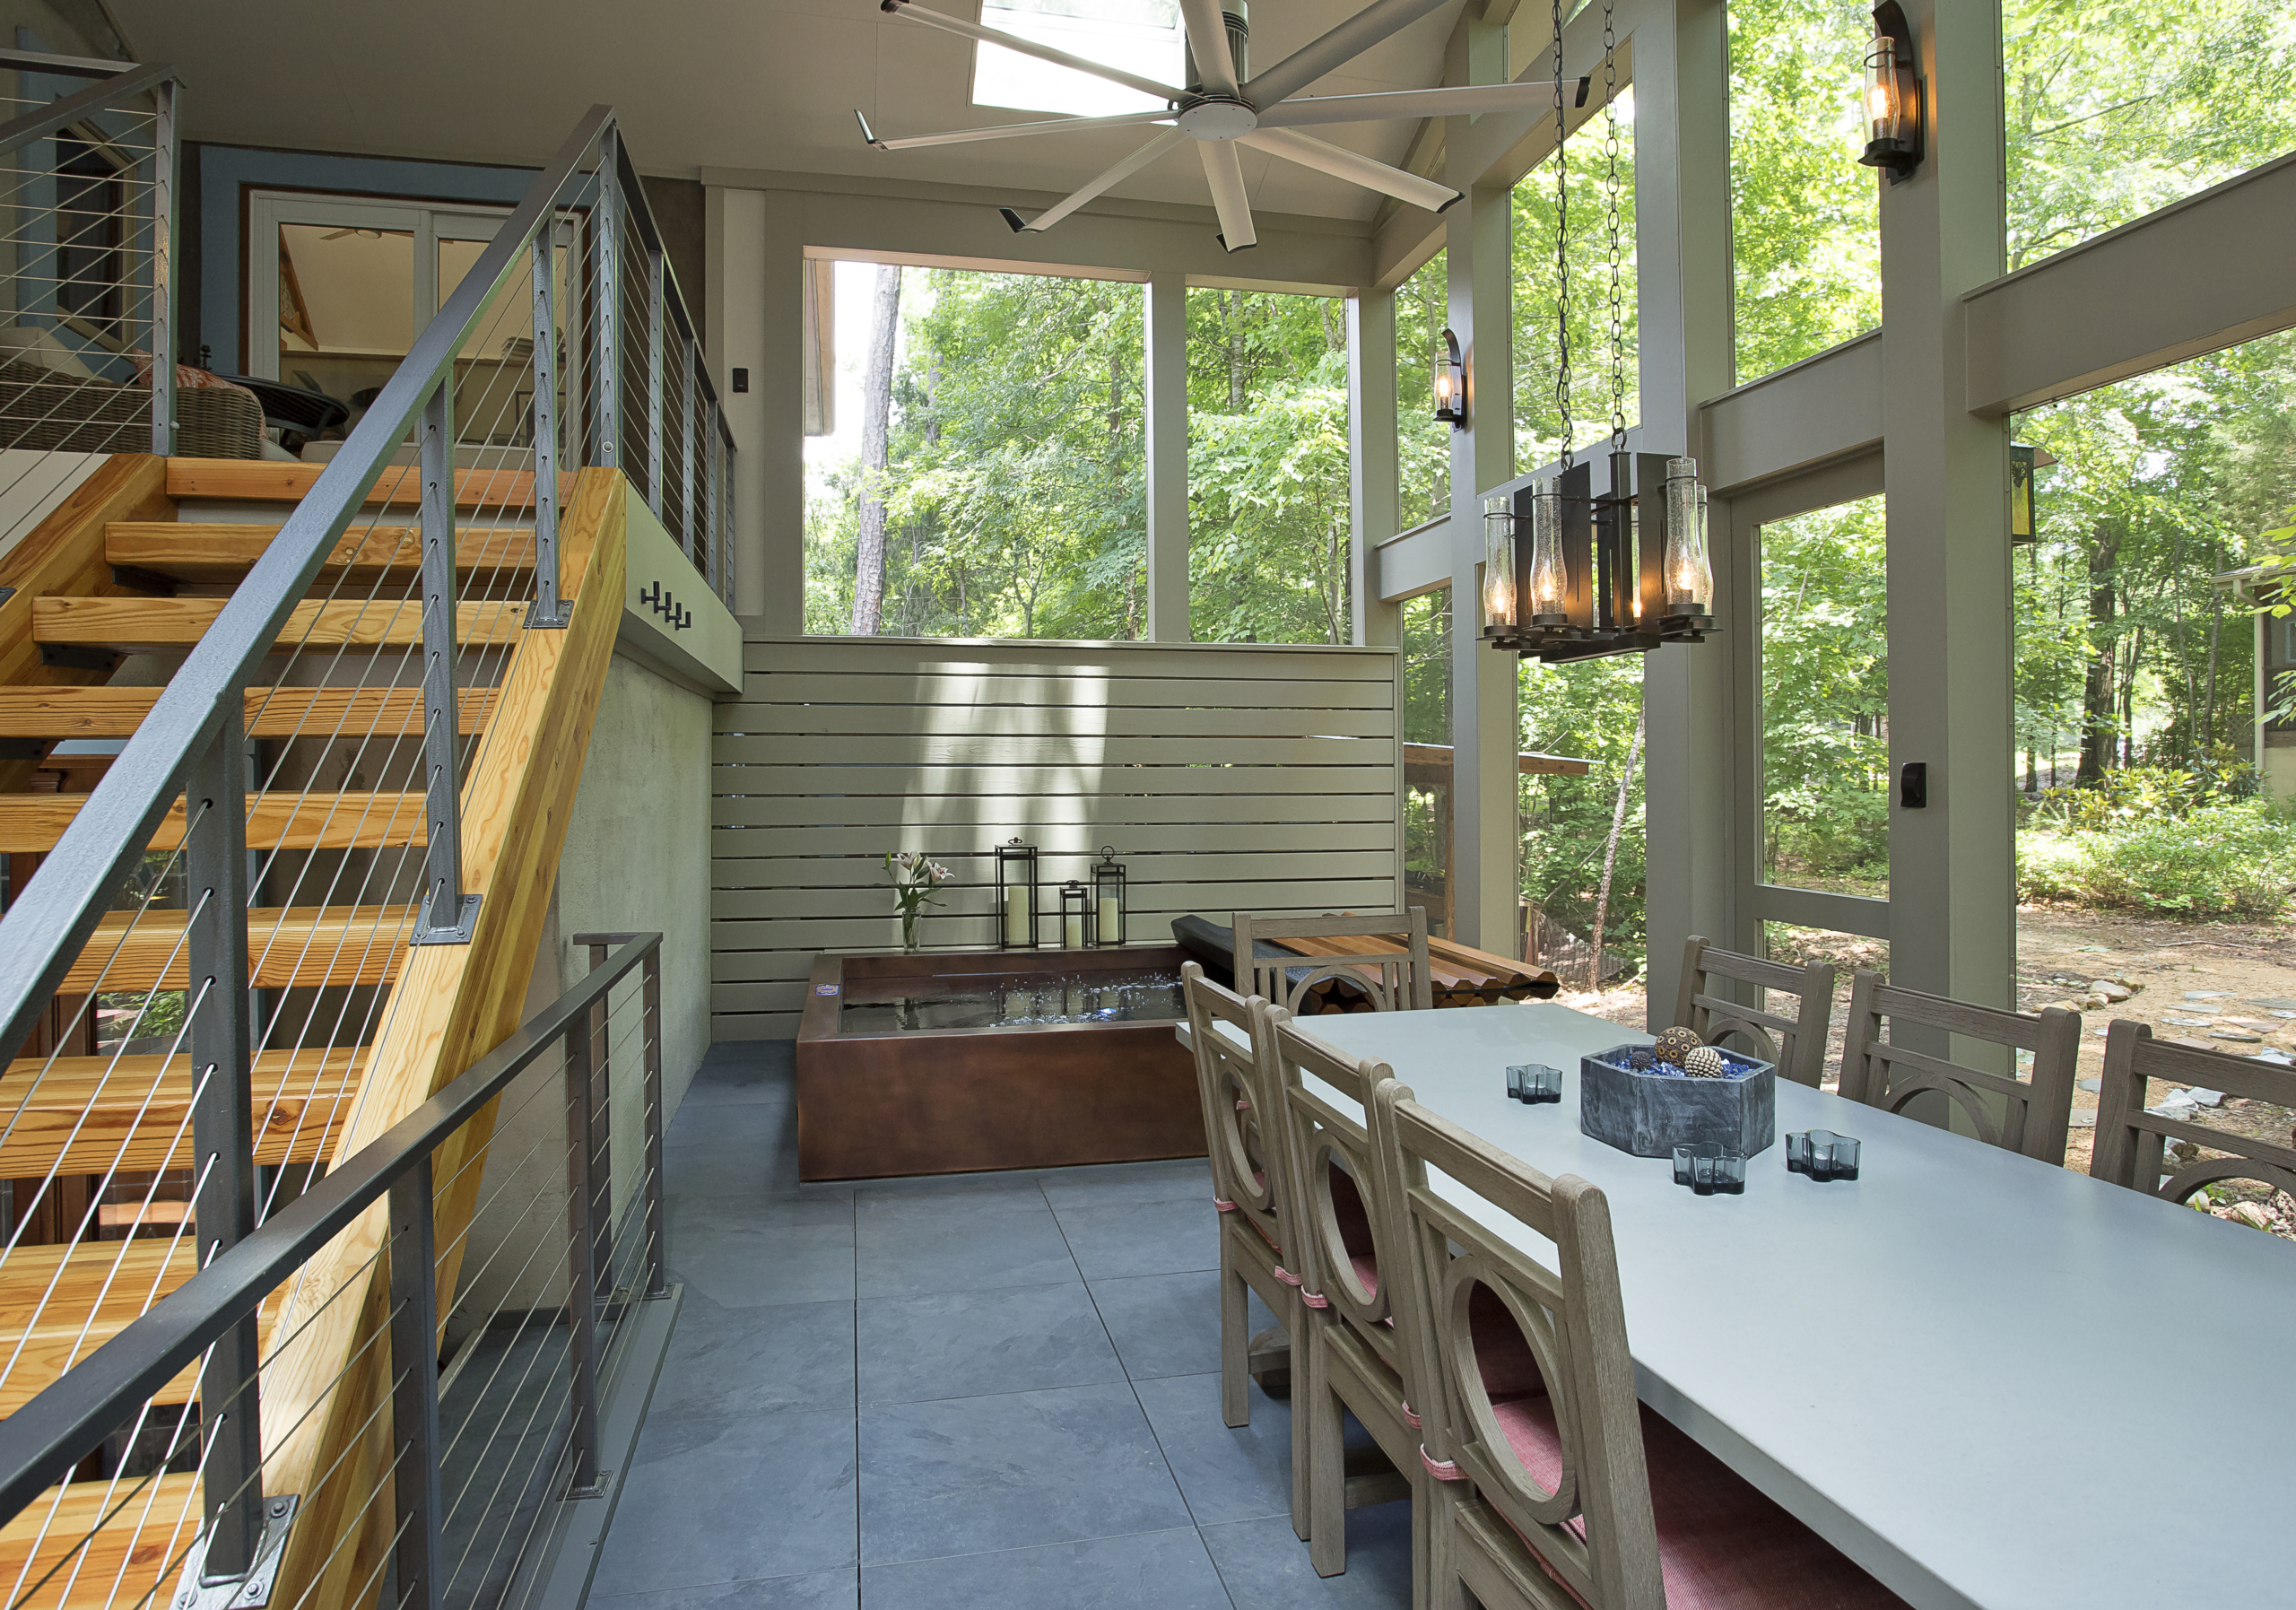 A view of the hot tub, dining table and stair in the screen porch